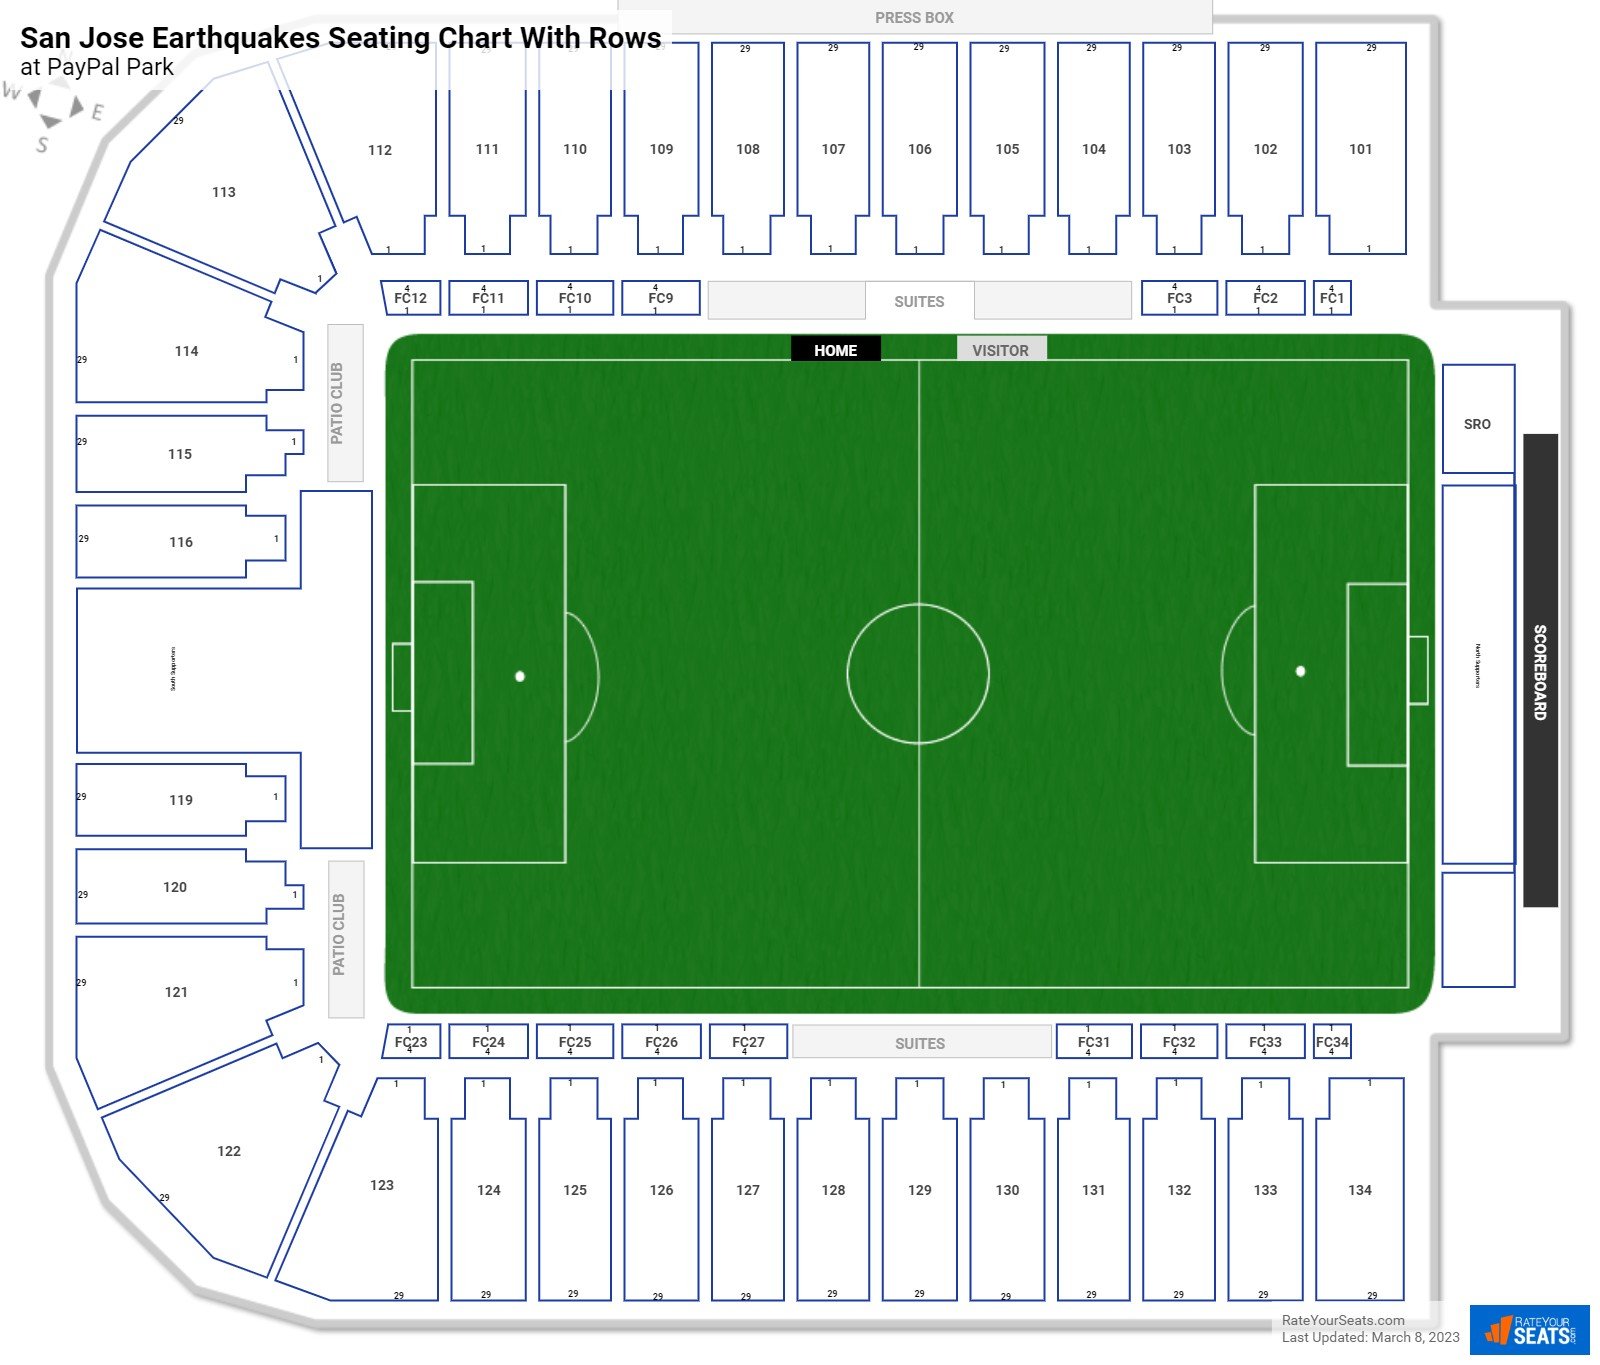 PayPal Park seating chart with row numbers